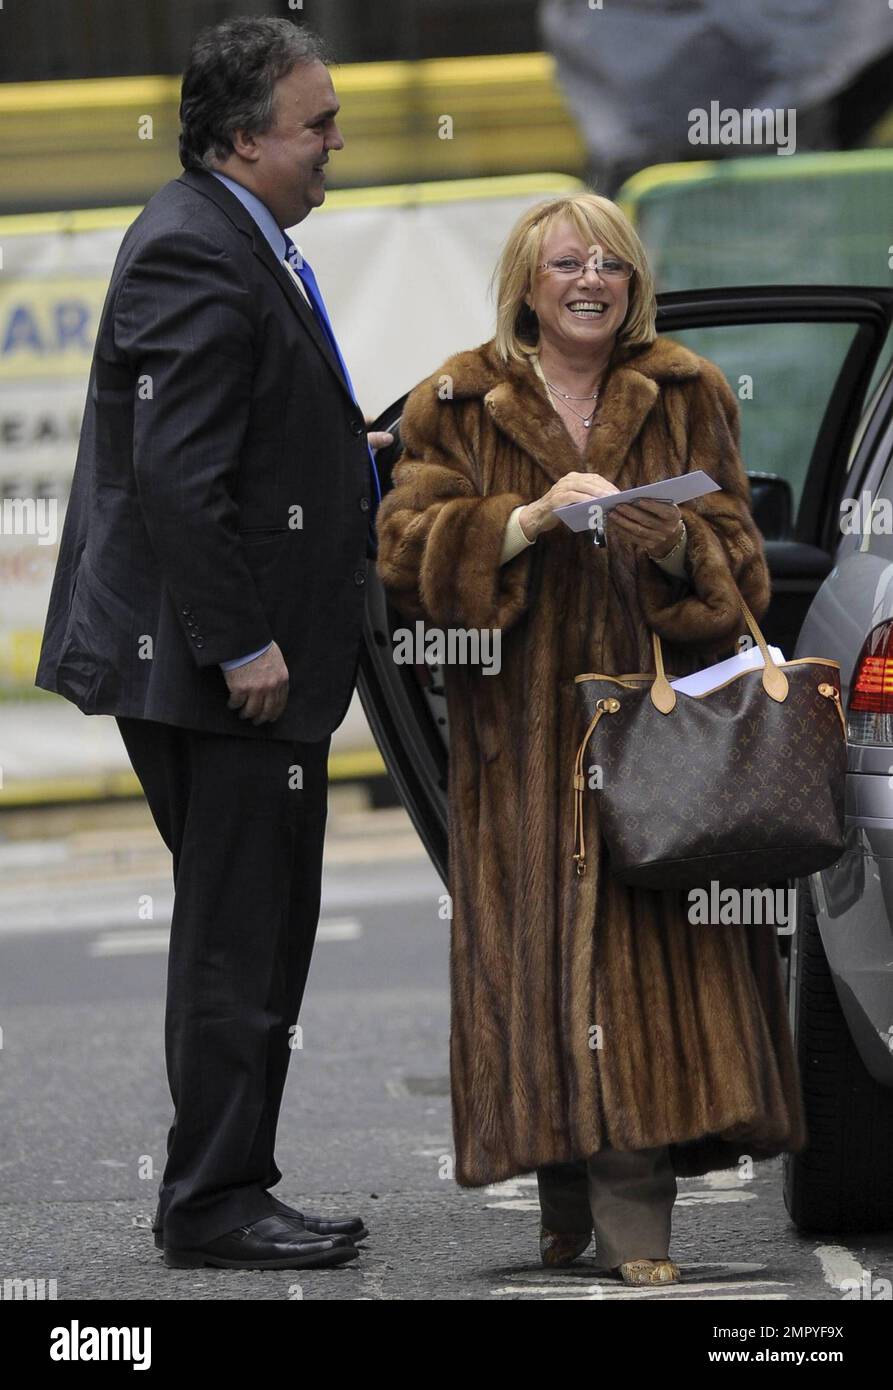 Singer and DJ Elaine Page looks striking in a full-length fur coat and  carrying a classic Louis Vuitton handbag as she arrives at BBC Radio 2.  London, UK. 1/28/11 Stock Photo - Alamy